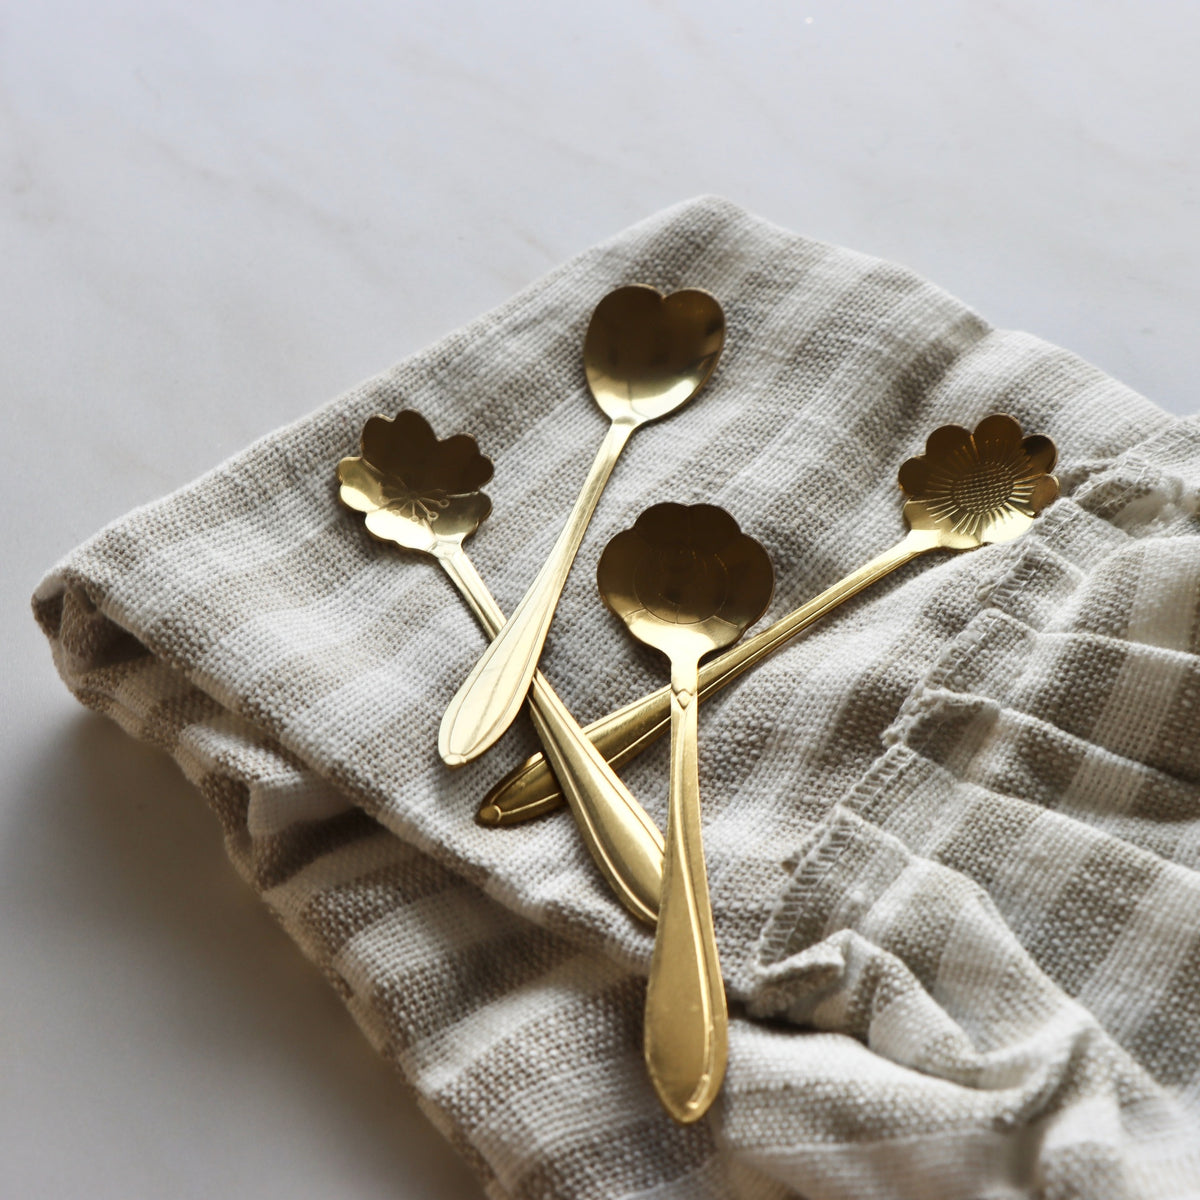 Pretty Posies Gold Stainless Steel Spoons - Set of 4 - Holistic Habitat 